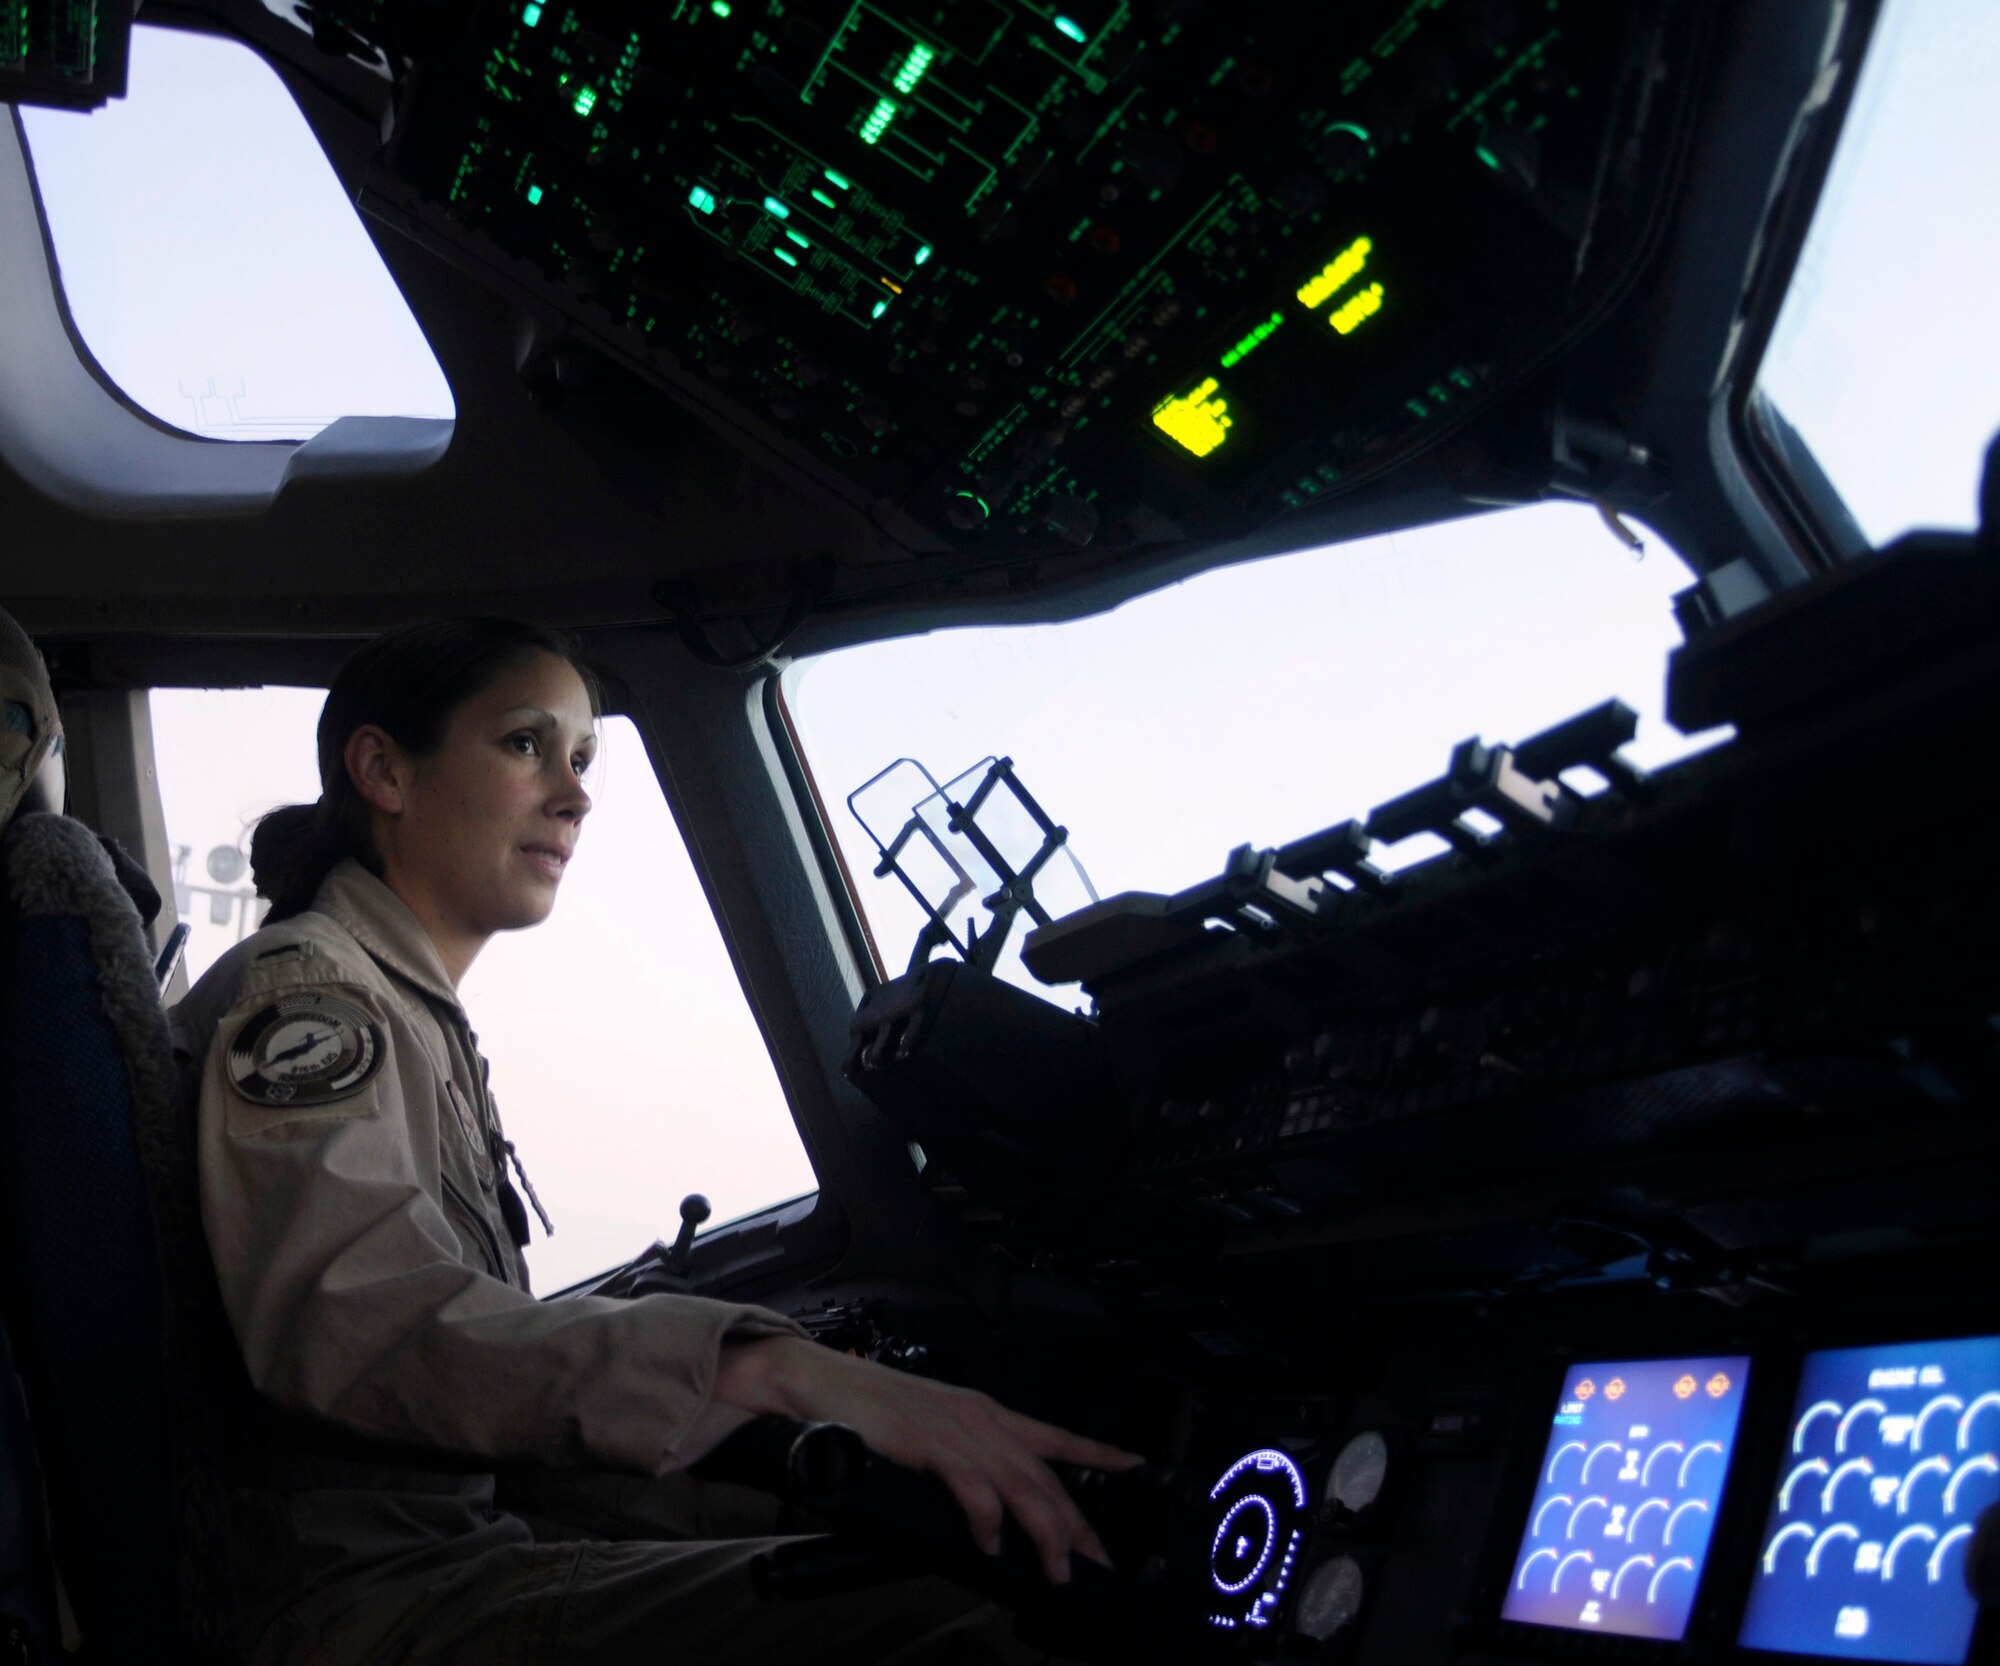 SOUTHWEST ASIA -- 1st Lt. Jessica Lopez in the cockpit of a C-17A Globemaster III Feb. 13. Lieutenant Lopez, a pilot from Charleston Air Force Base, S.C., flies airlift missions over Iraq and Afghanistan from her deployed location in Southwest Asia. (U.S. Air Force photo/Senior Airman Domonique Simmons)